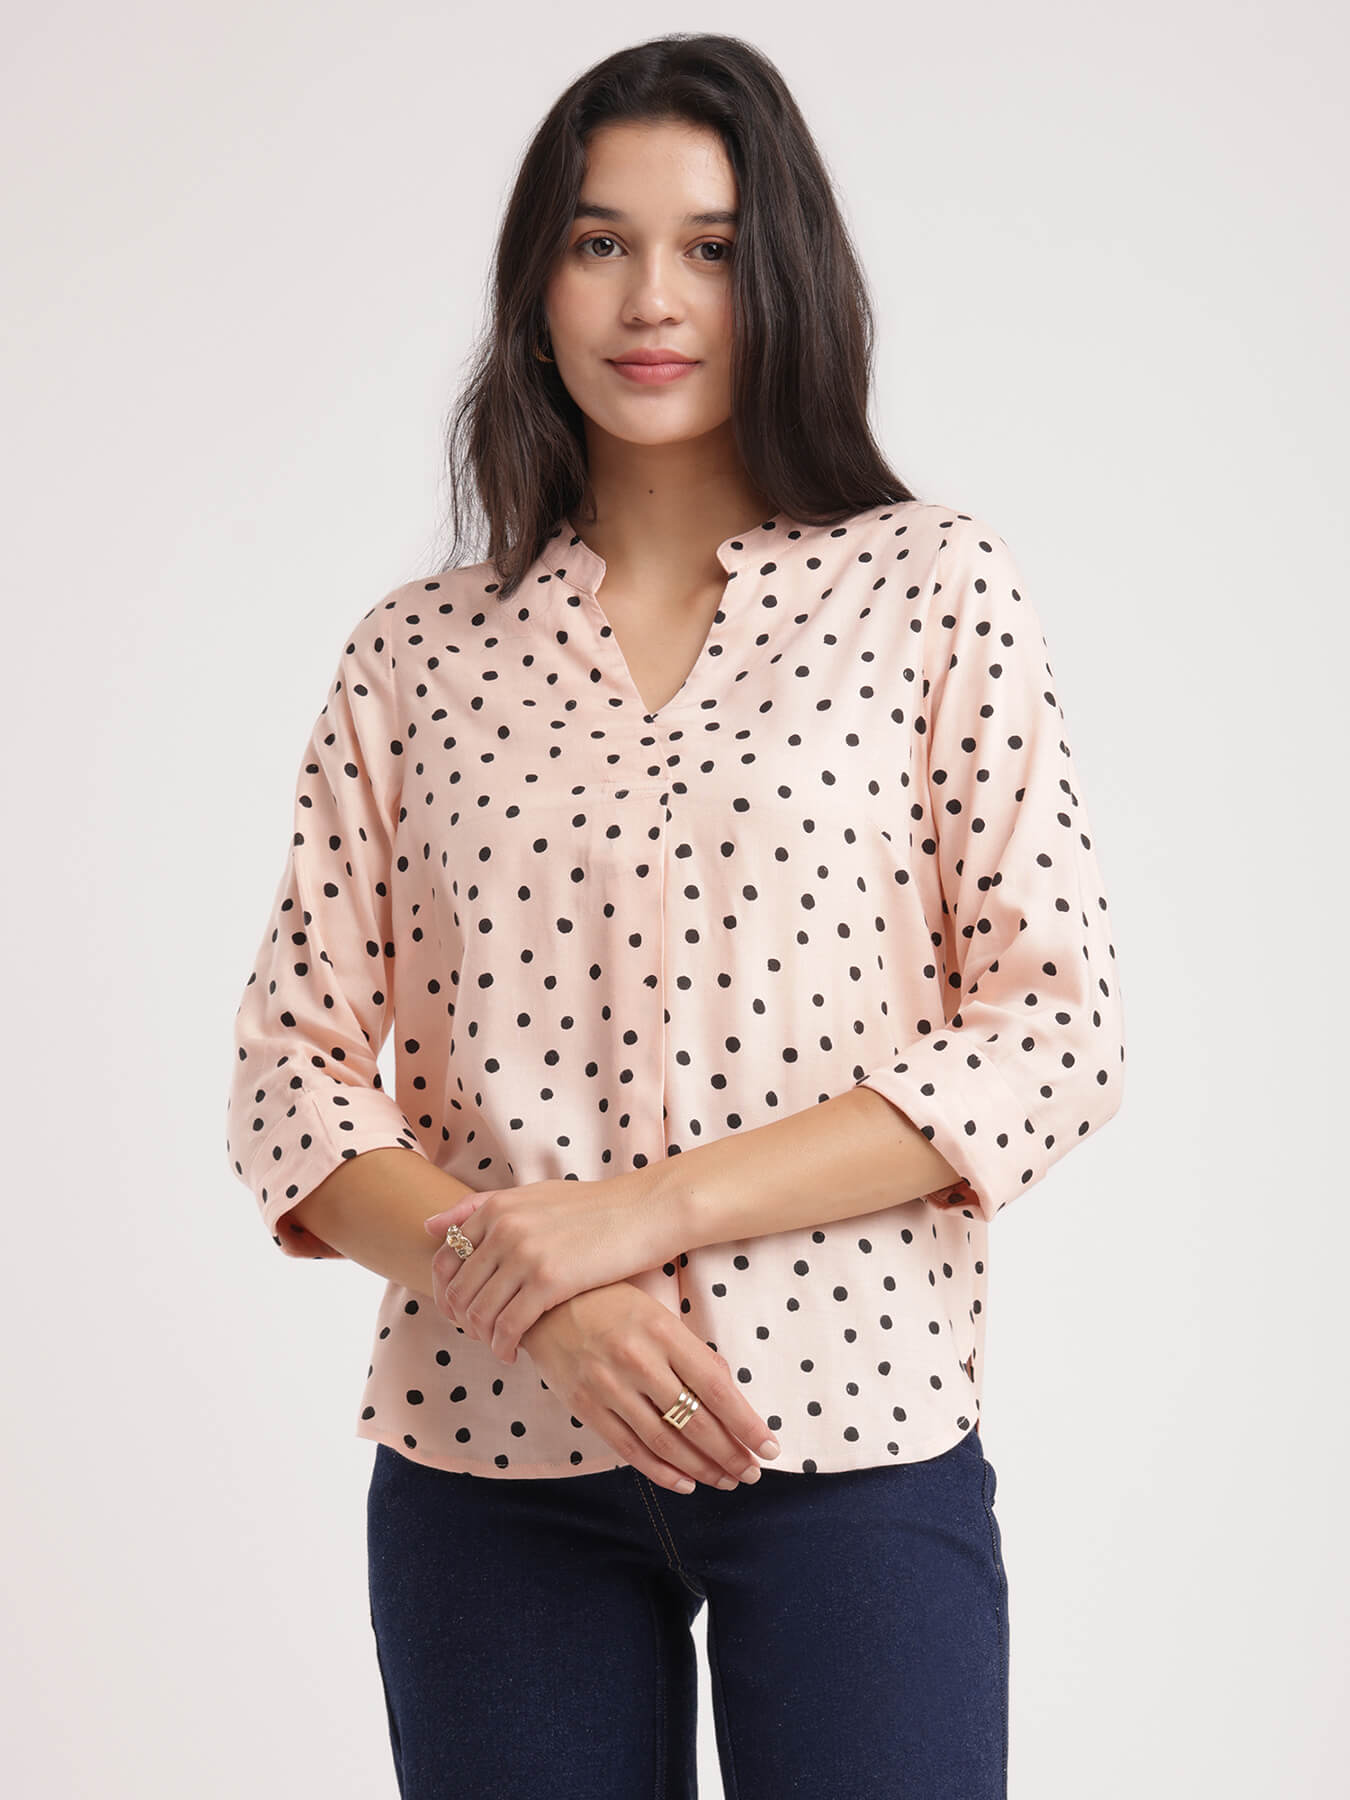 Buy Peach And Black Polka Dot Top Online | FableStreet